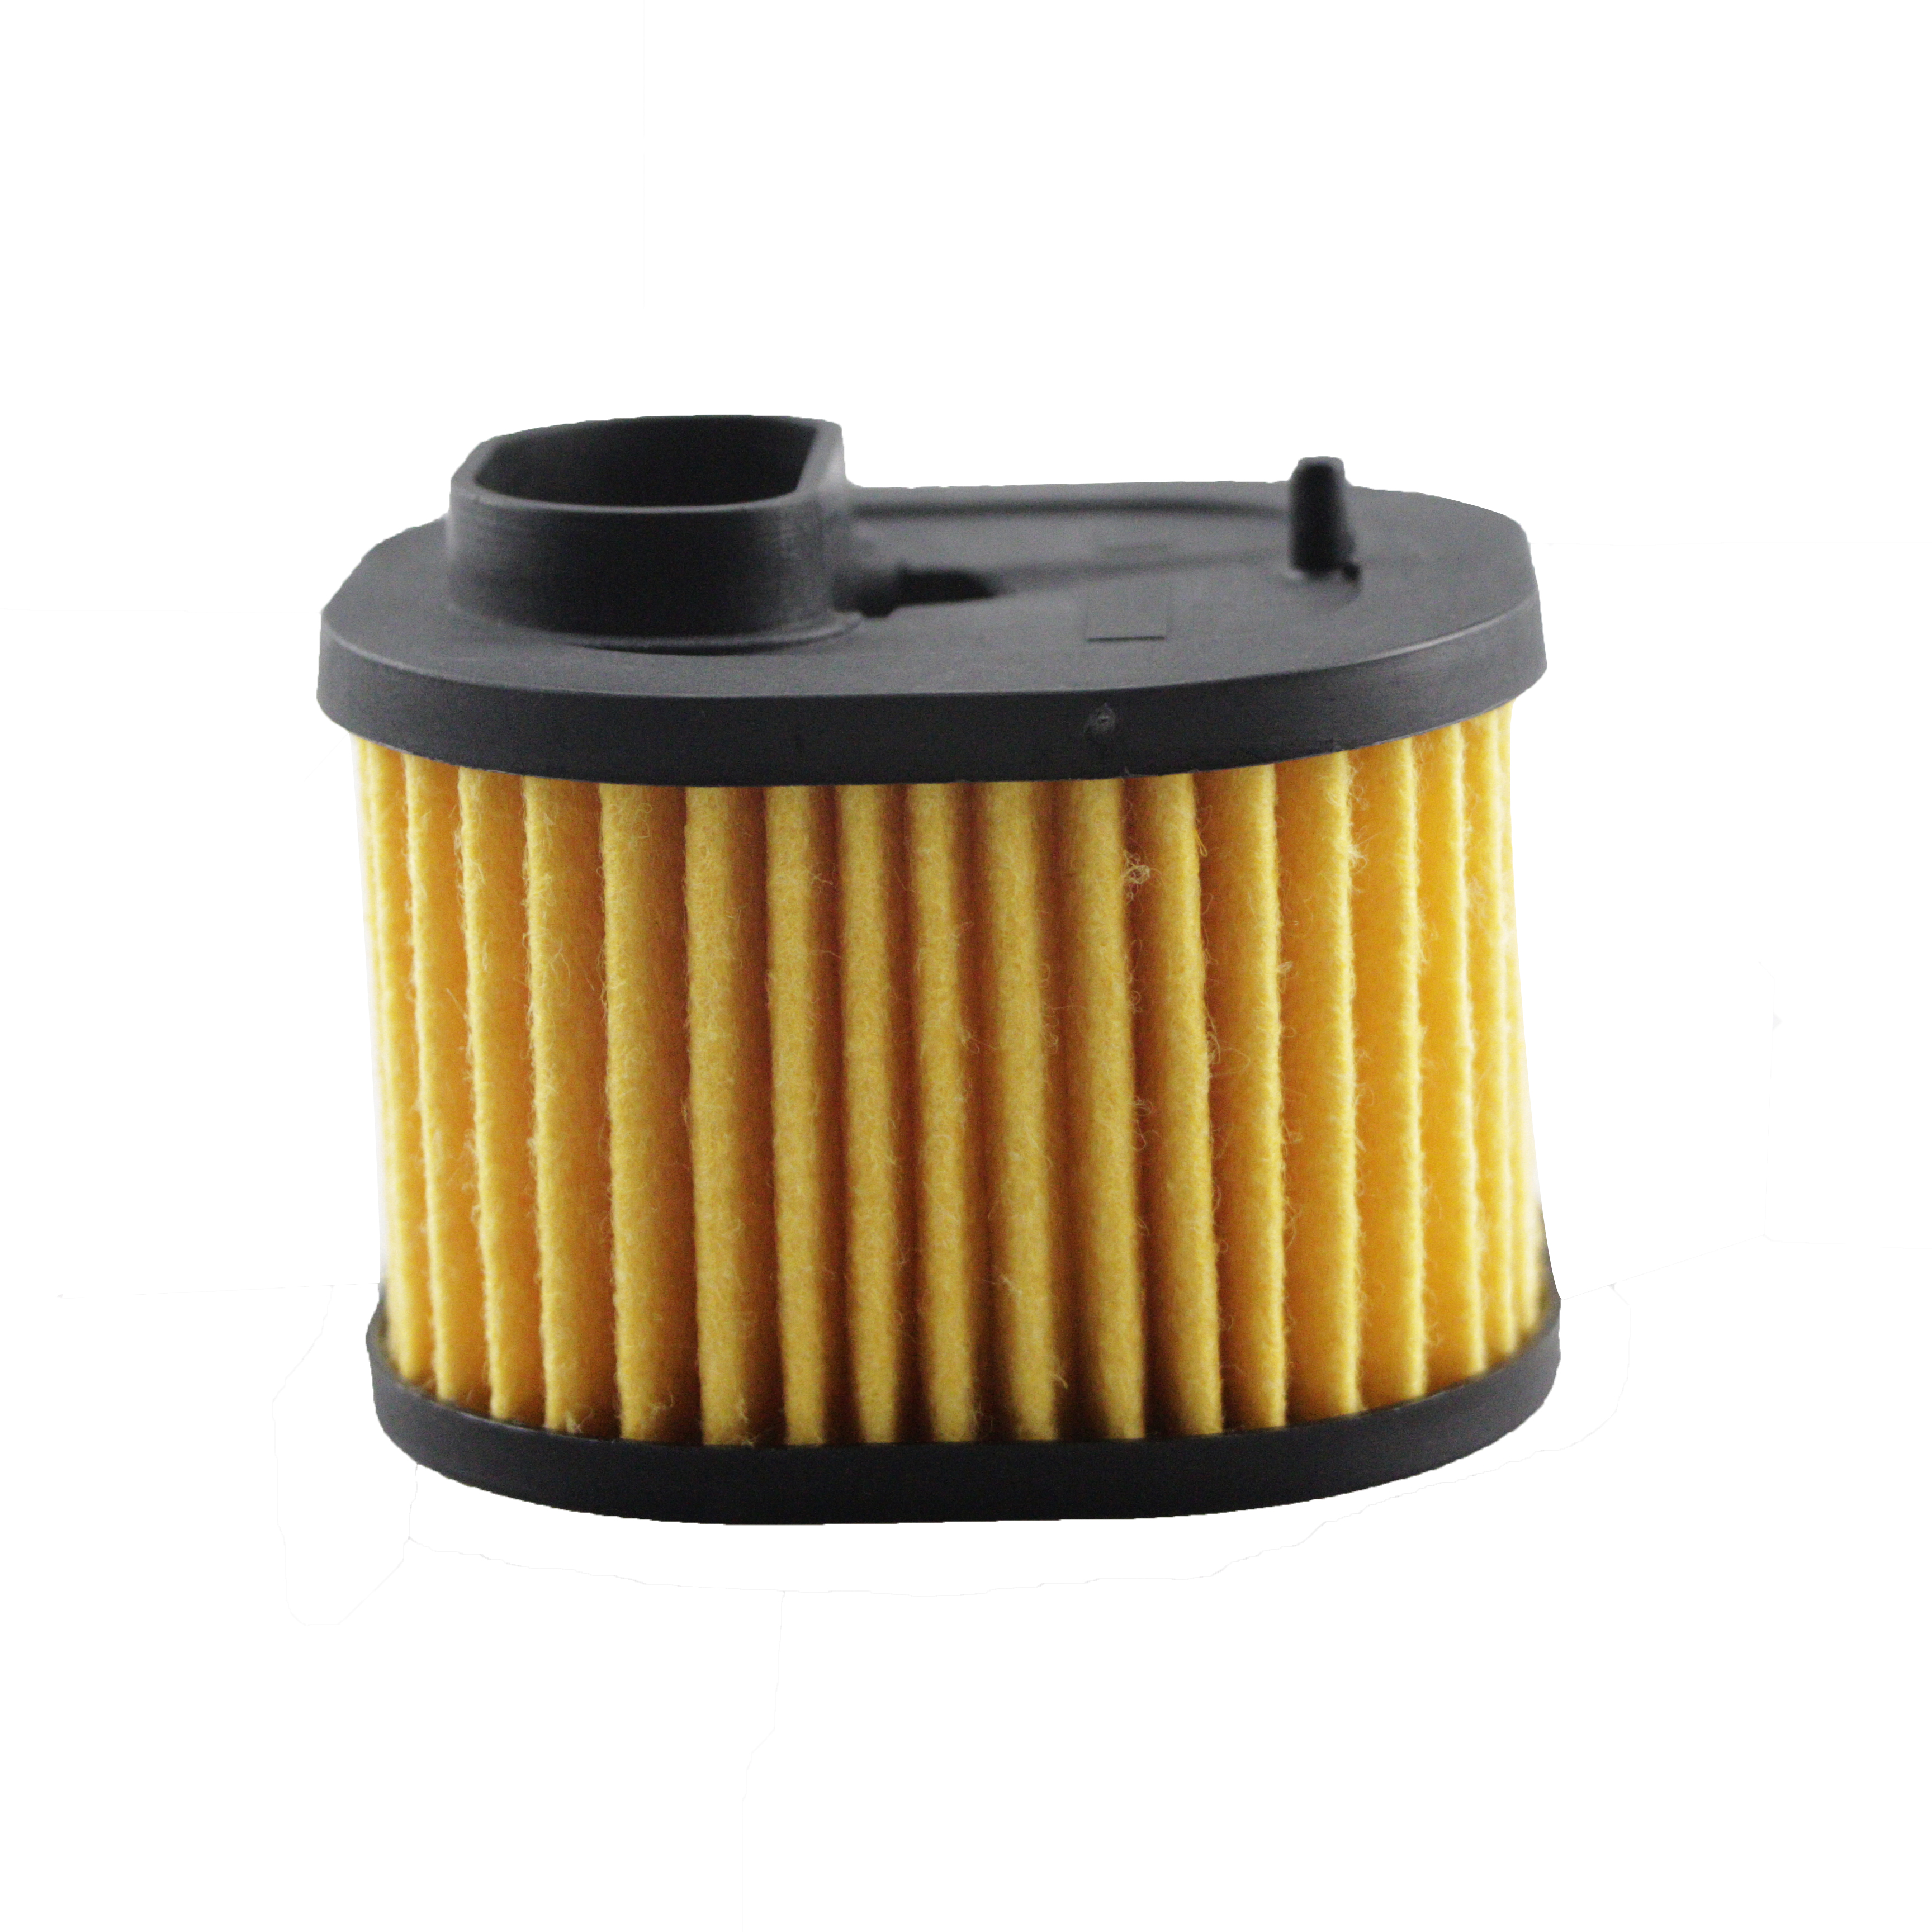 Ignition Coil Air Filter Cleaner F Husqvarna 362 365 371 372 XP OEM 537 81 27-01 